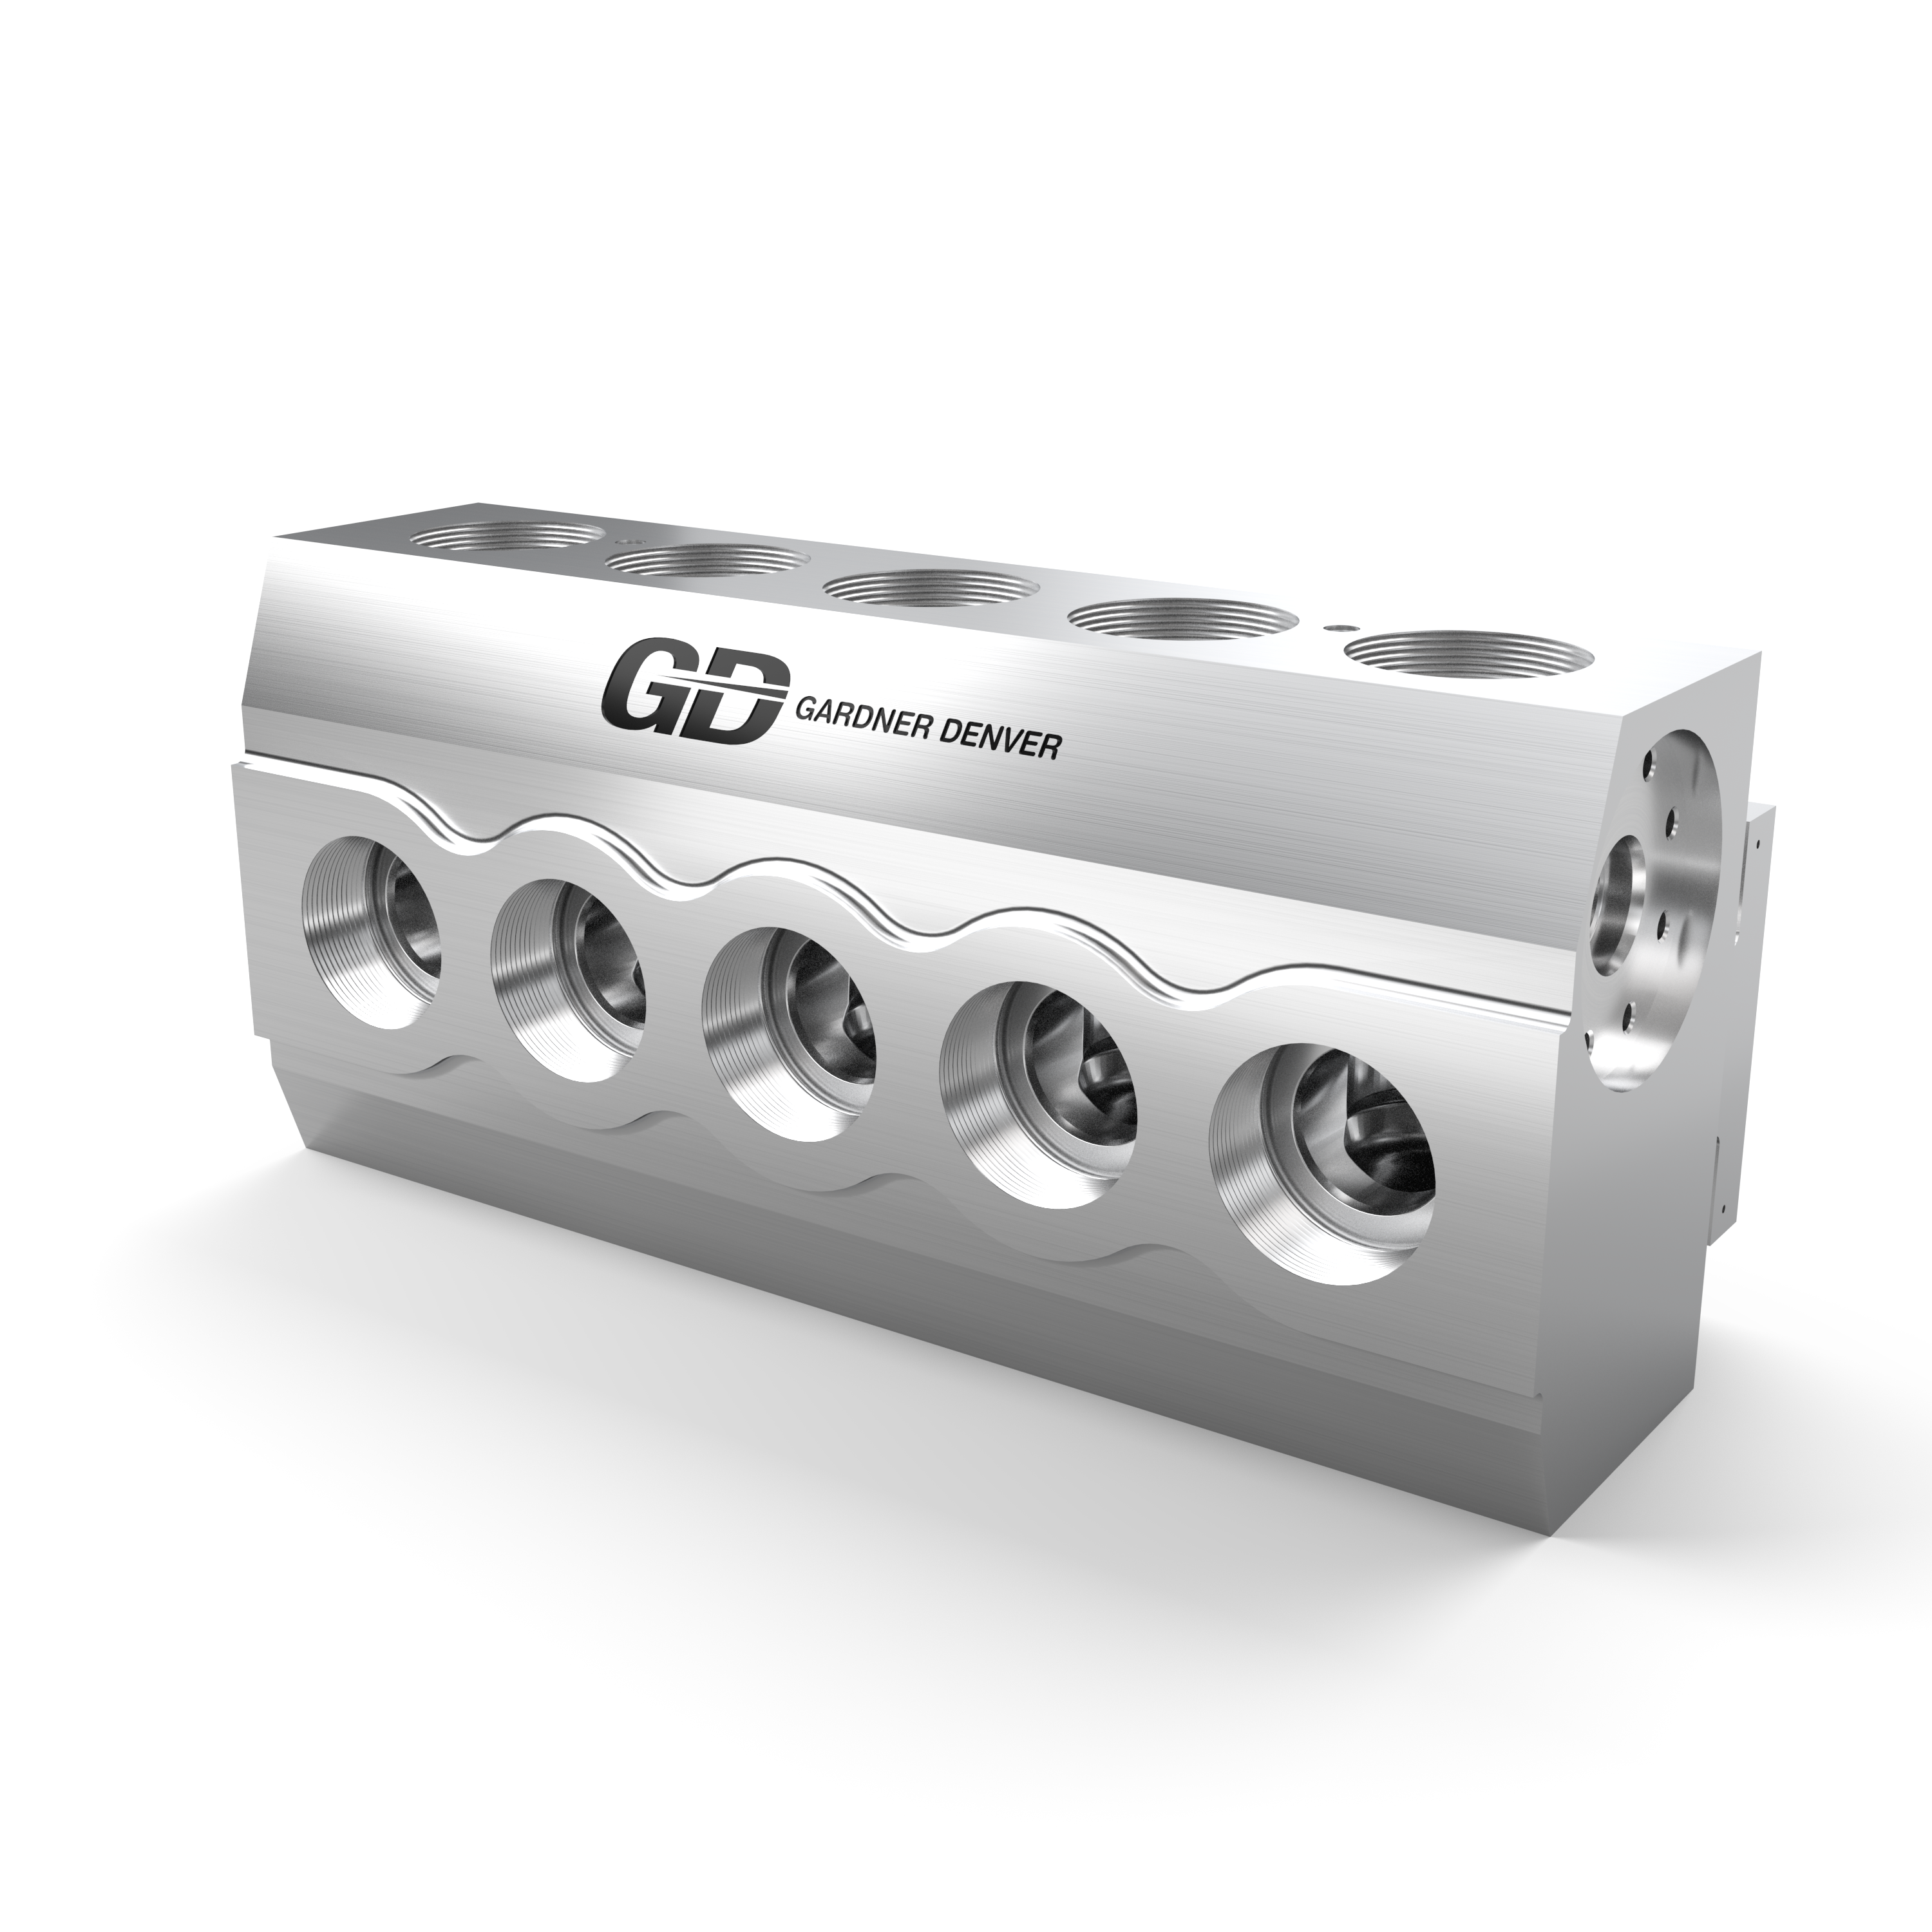 Gardner Denver's GDNX, the company's next generation of fluid end technology.